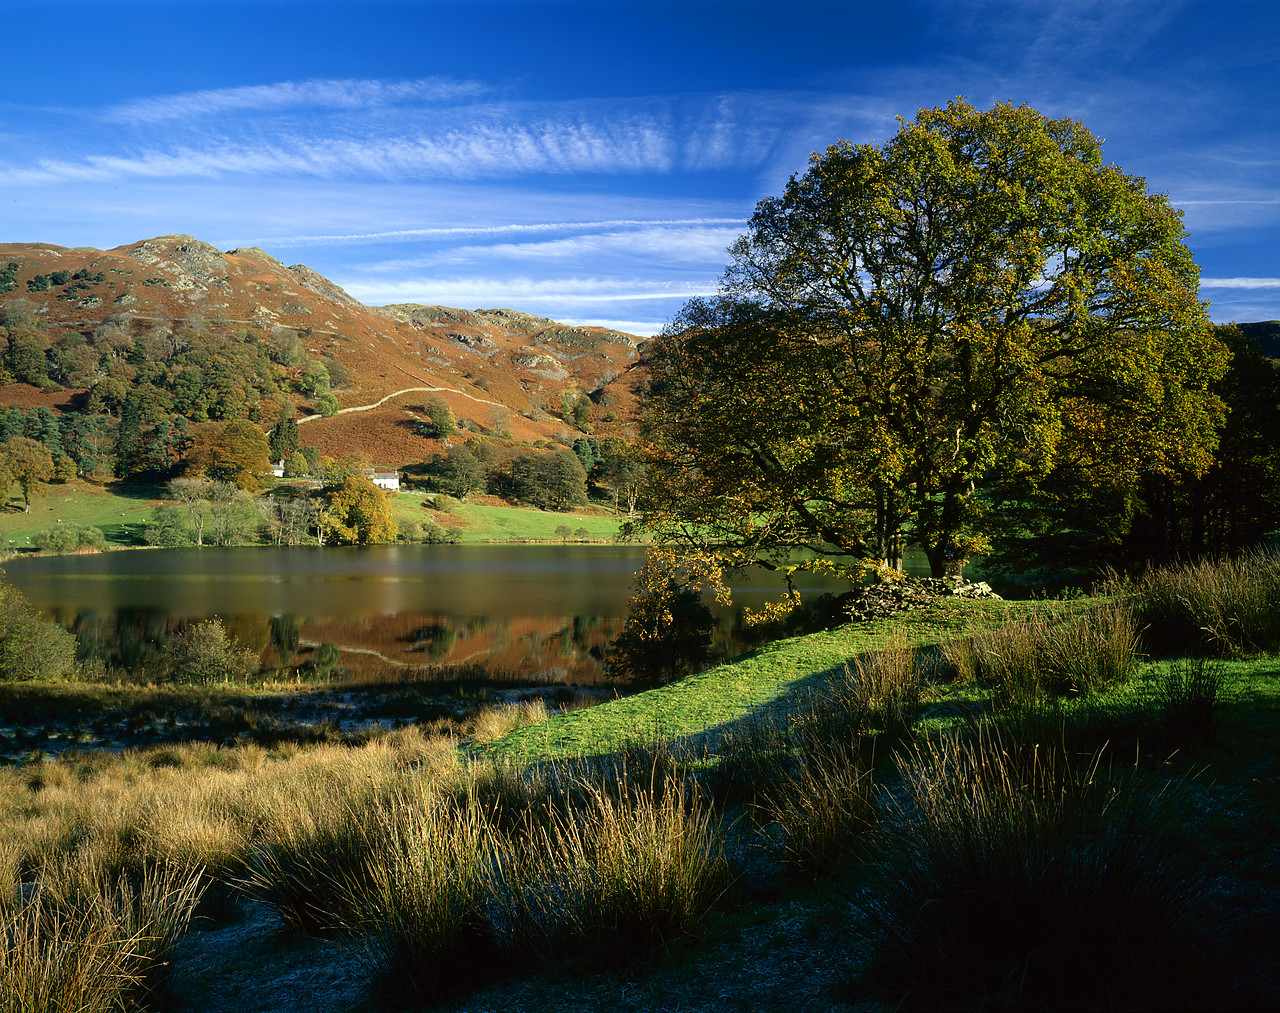 #060525-1 - View over Loughrigg Tarn in Autumn, Lake District National Park, Cumbria, England